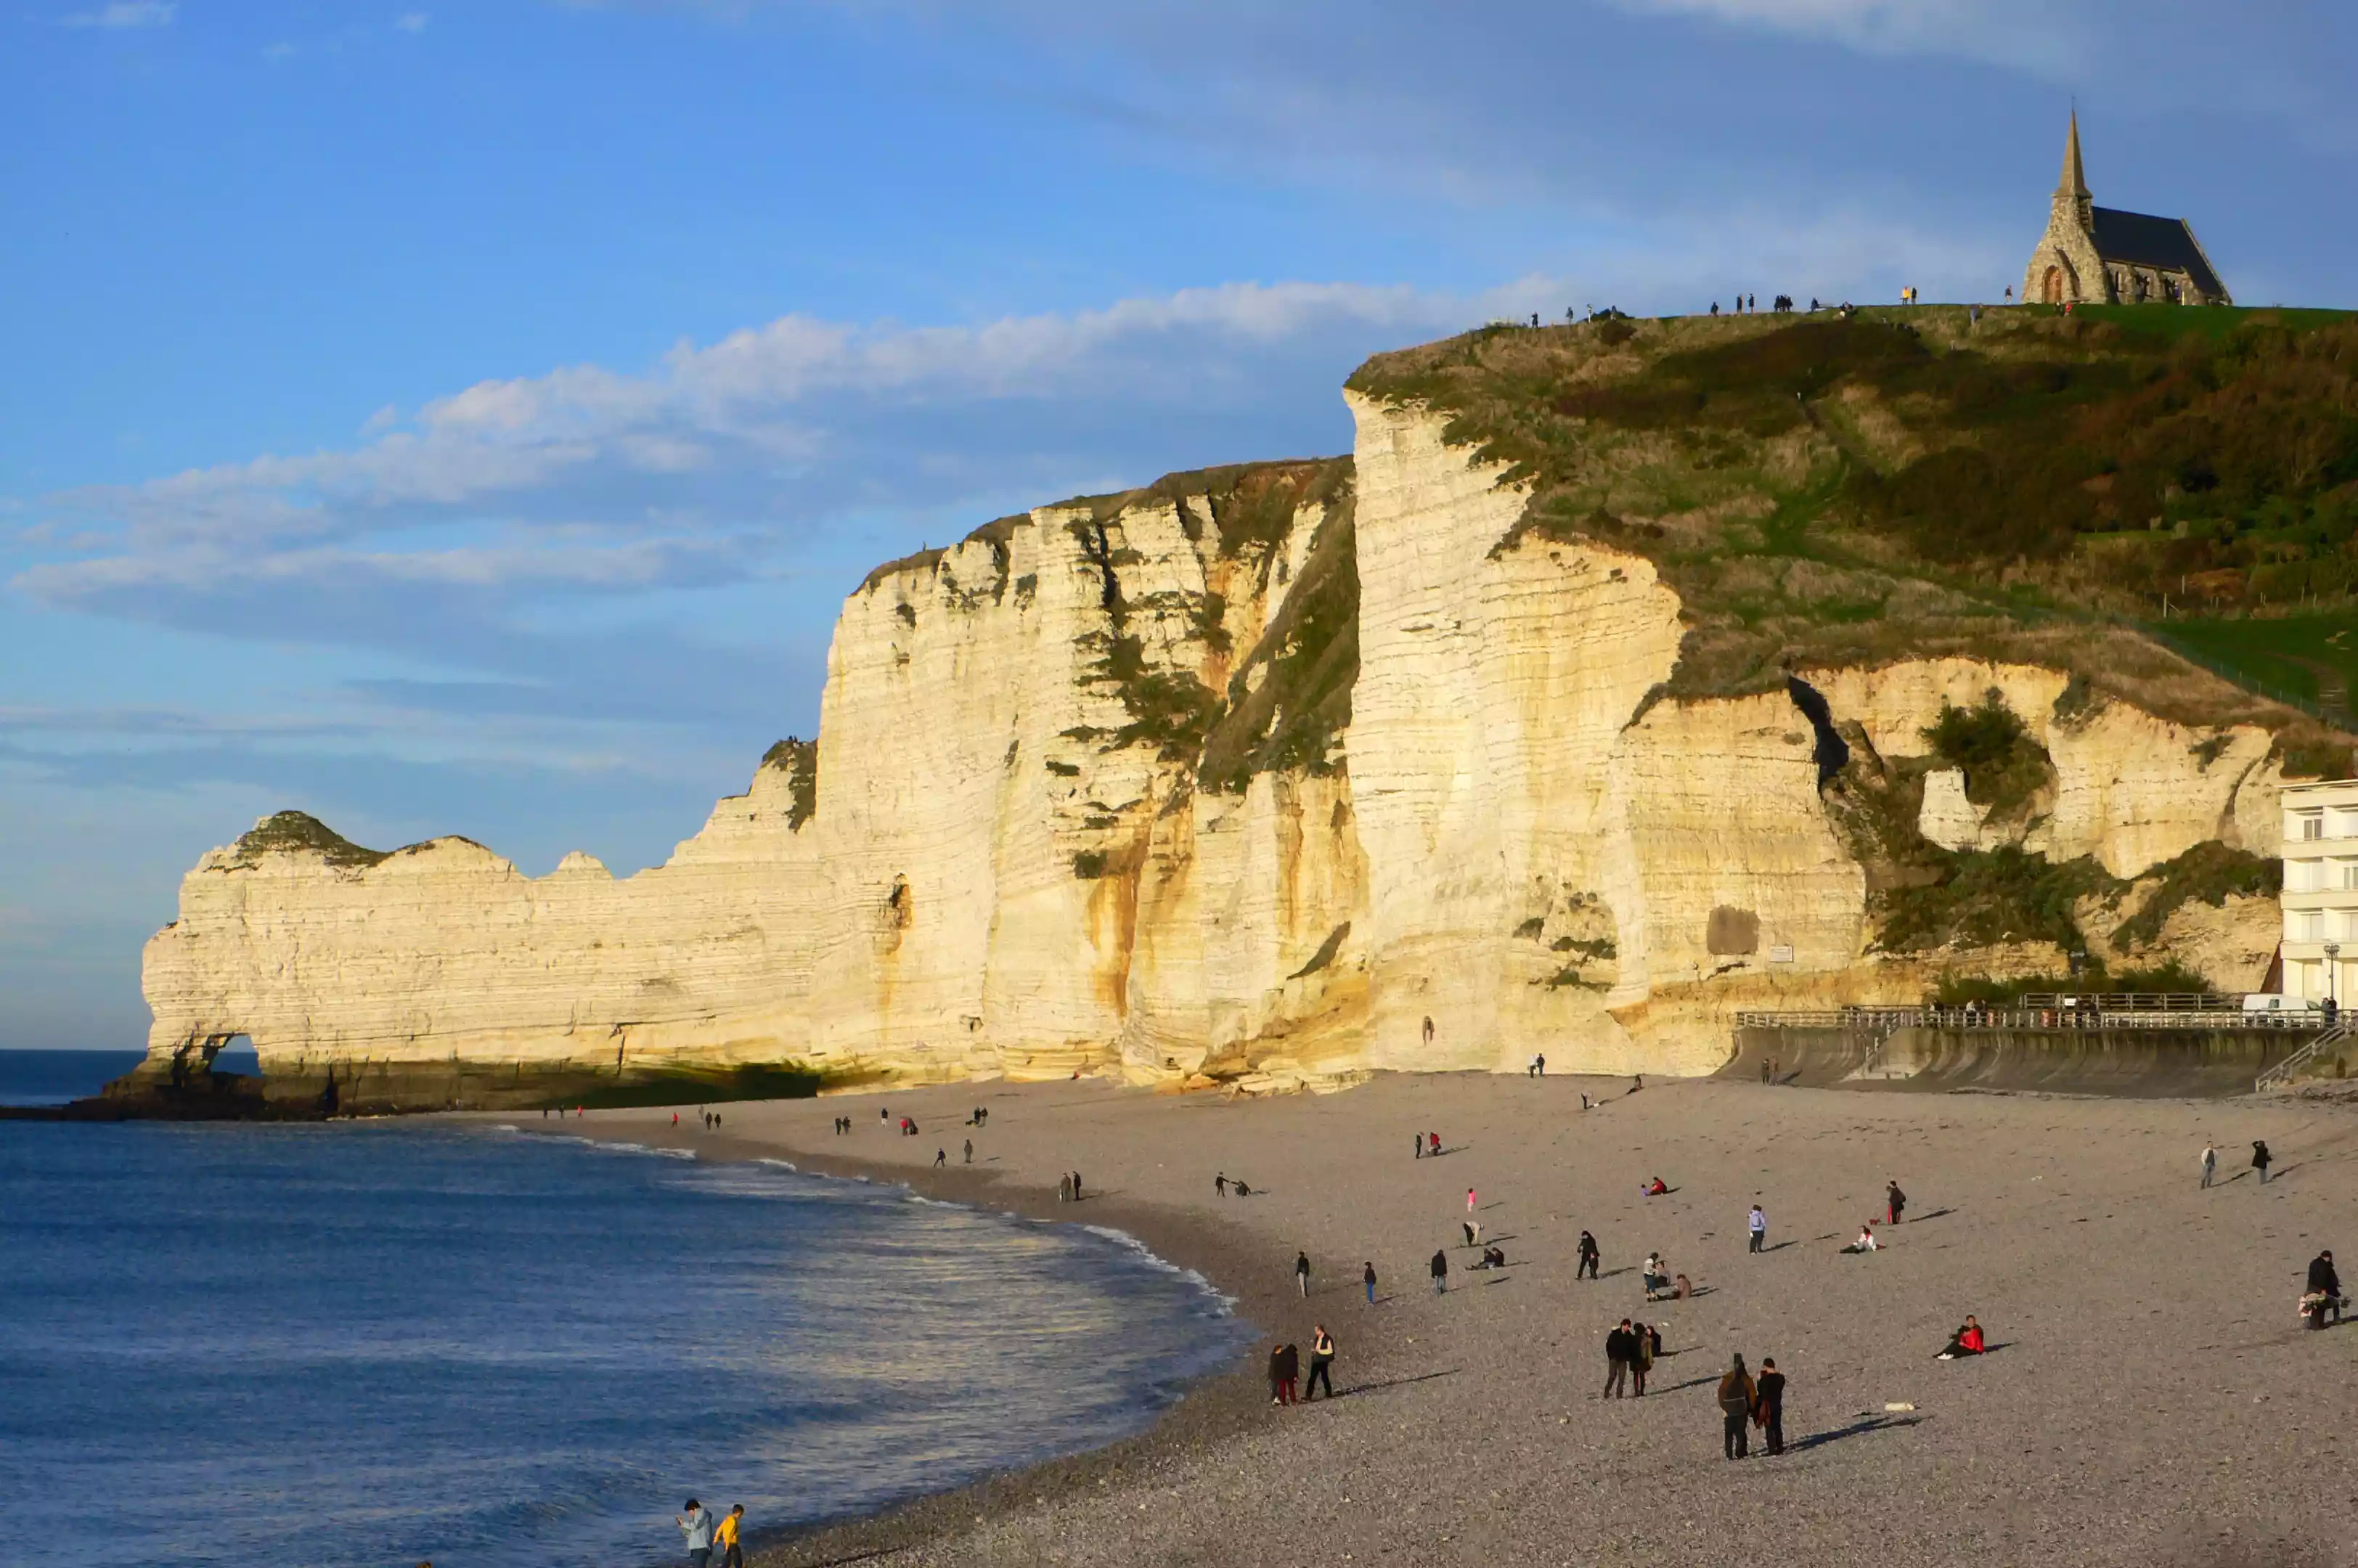 The white face of the cliffs at Étretat, France on a sunny day